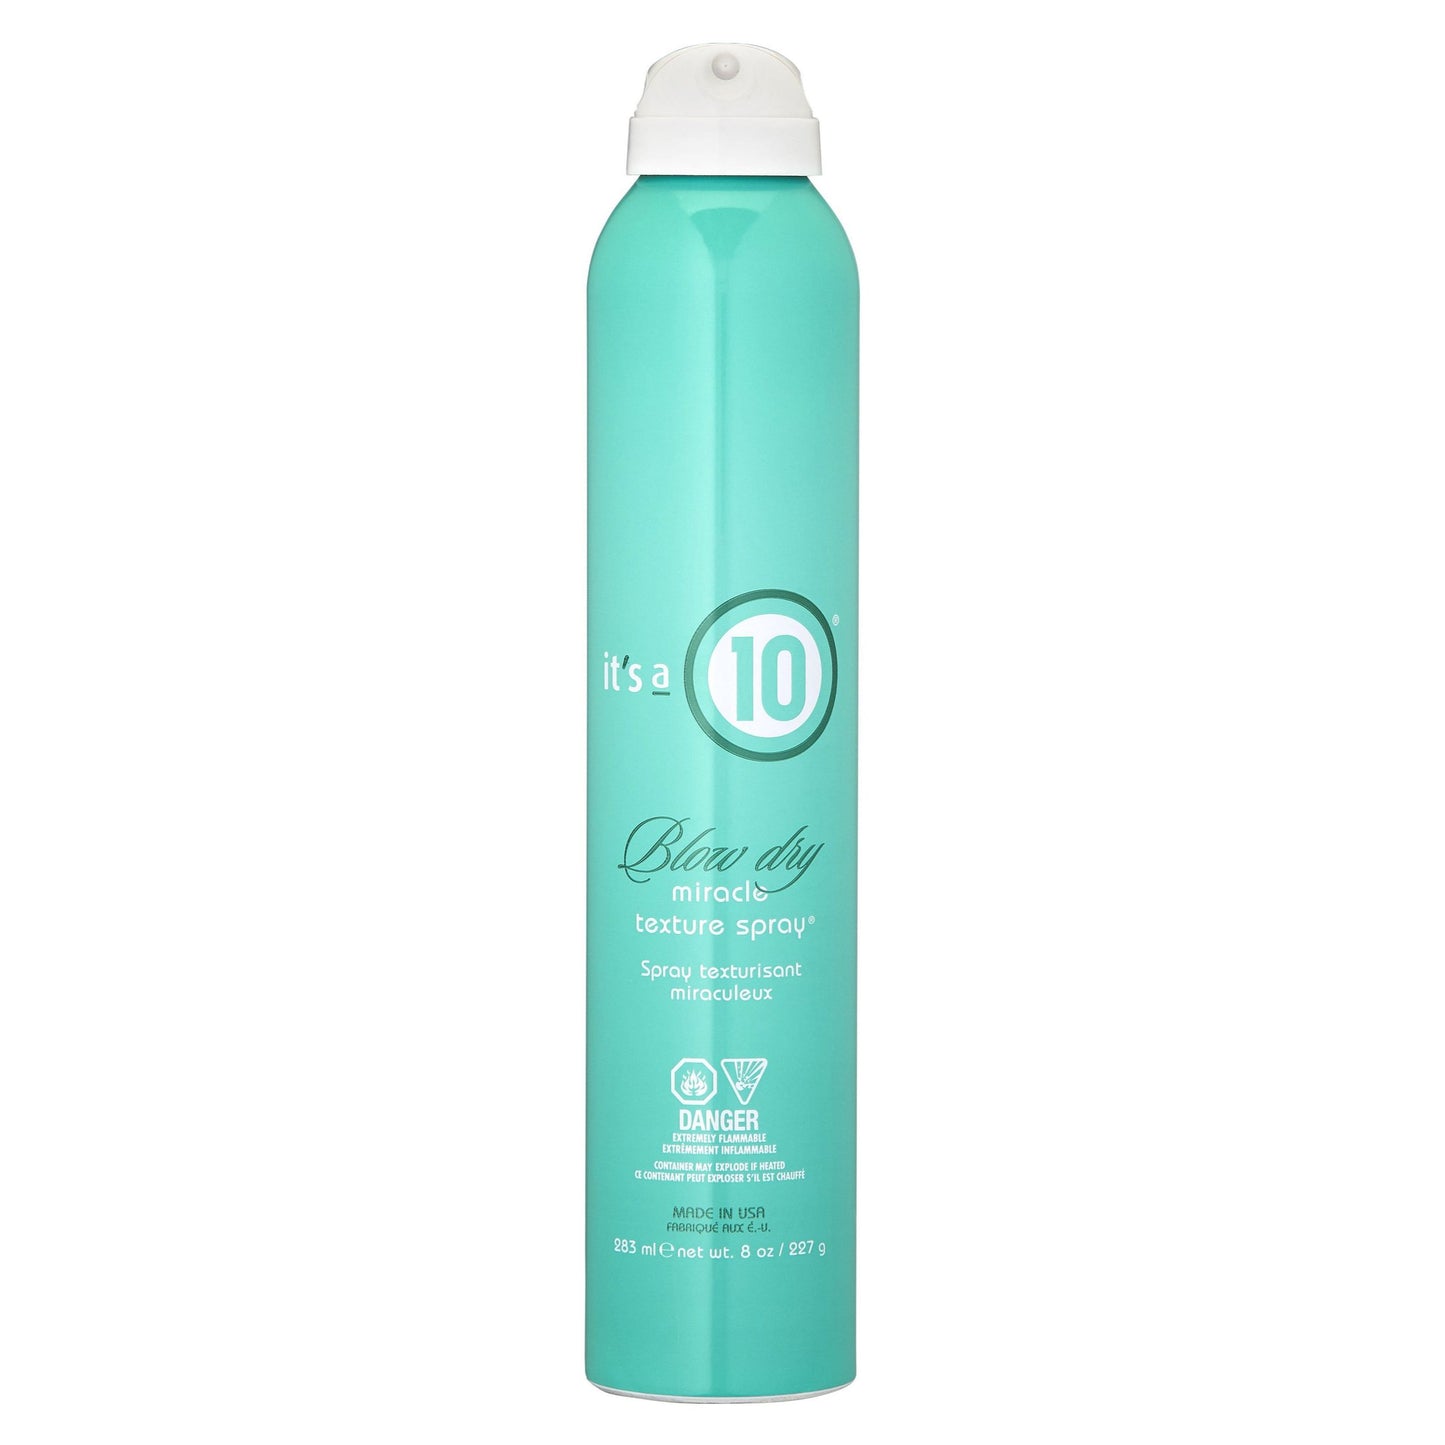 It's A 10 Blow Dry Miracle Texture Spray